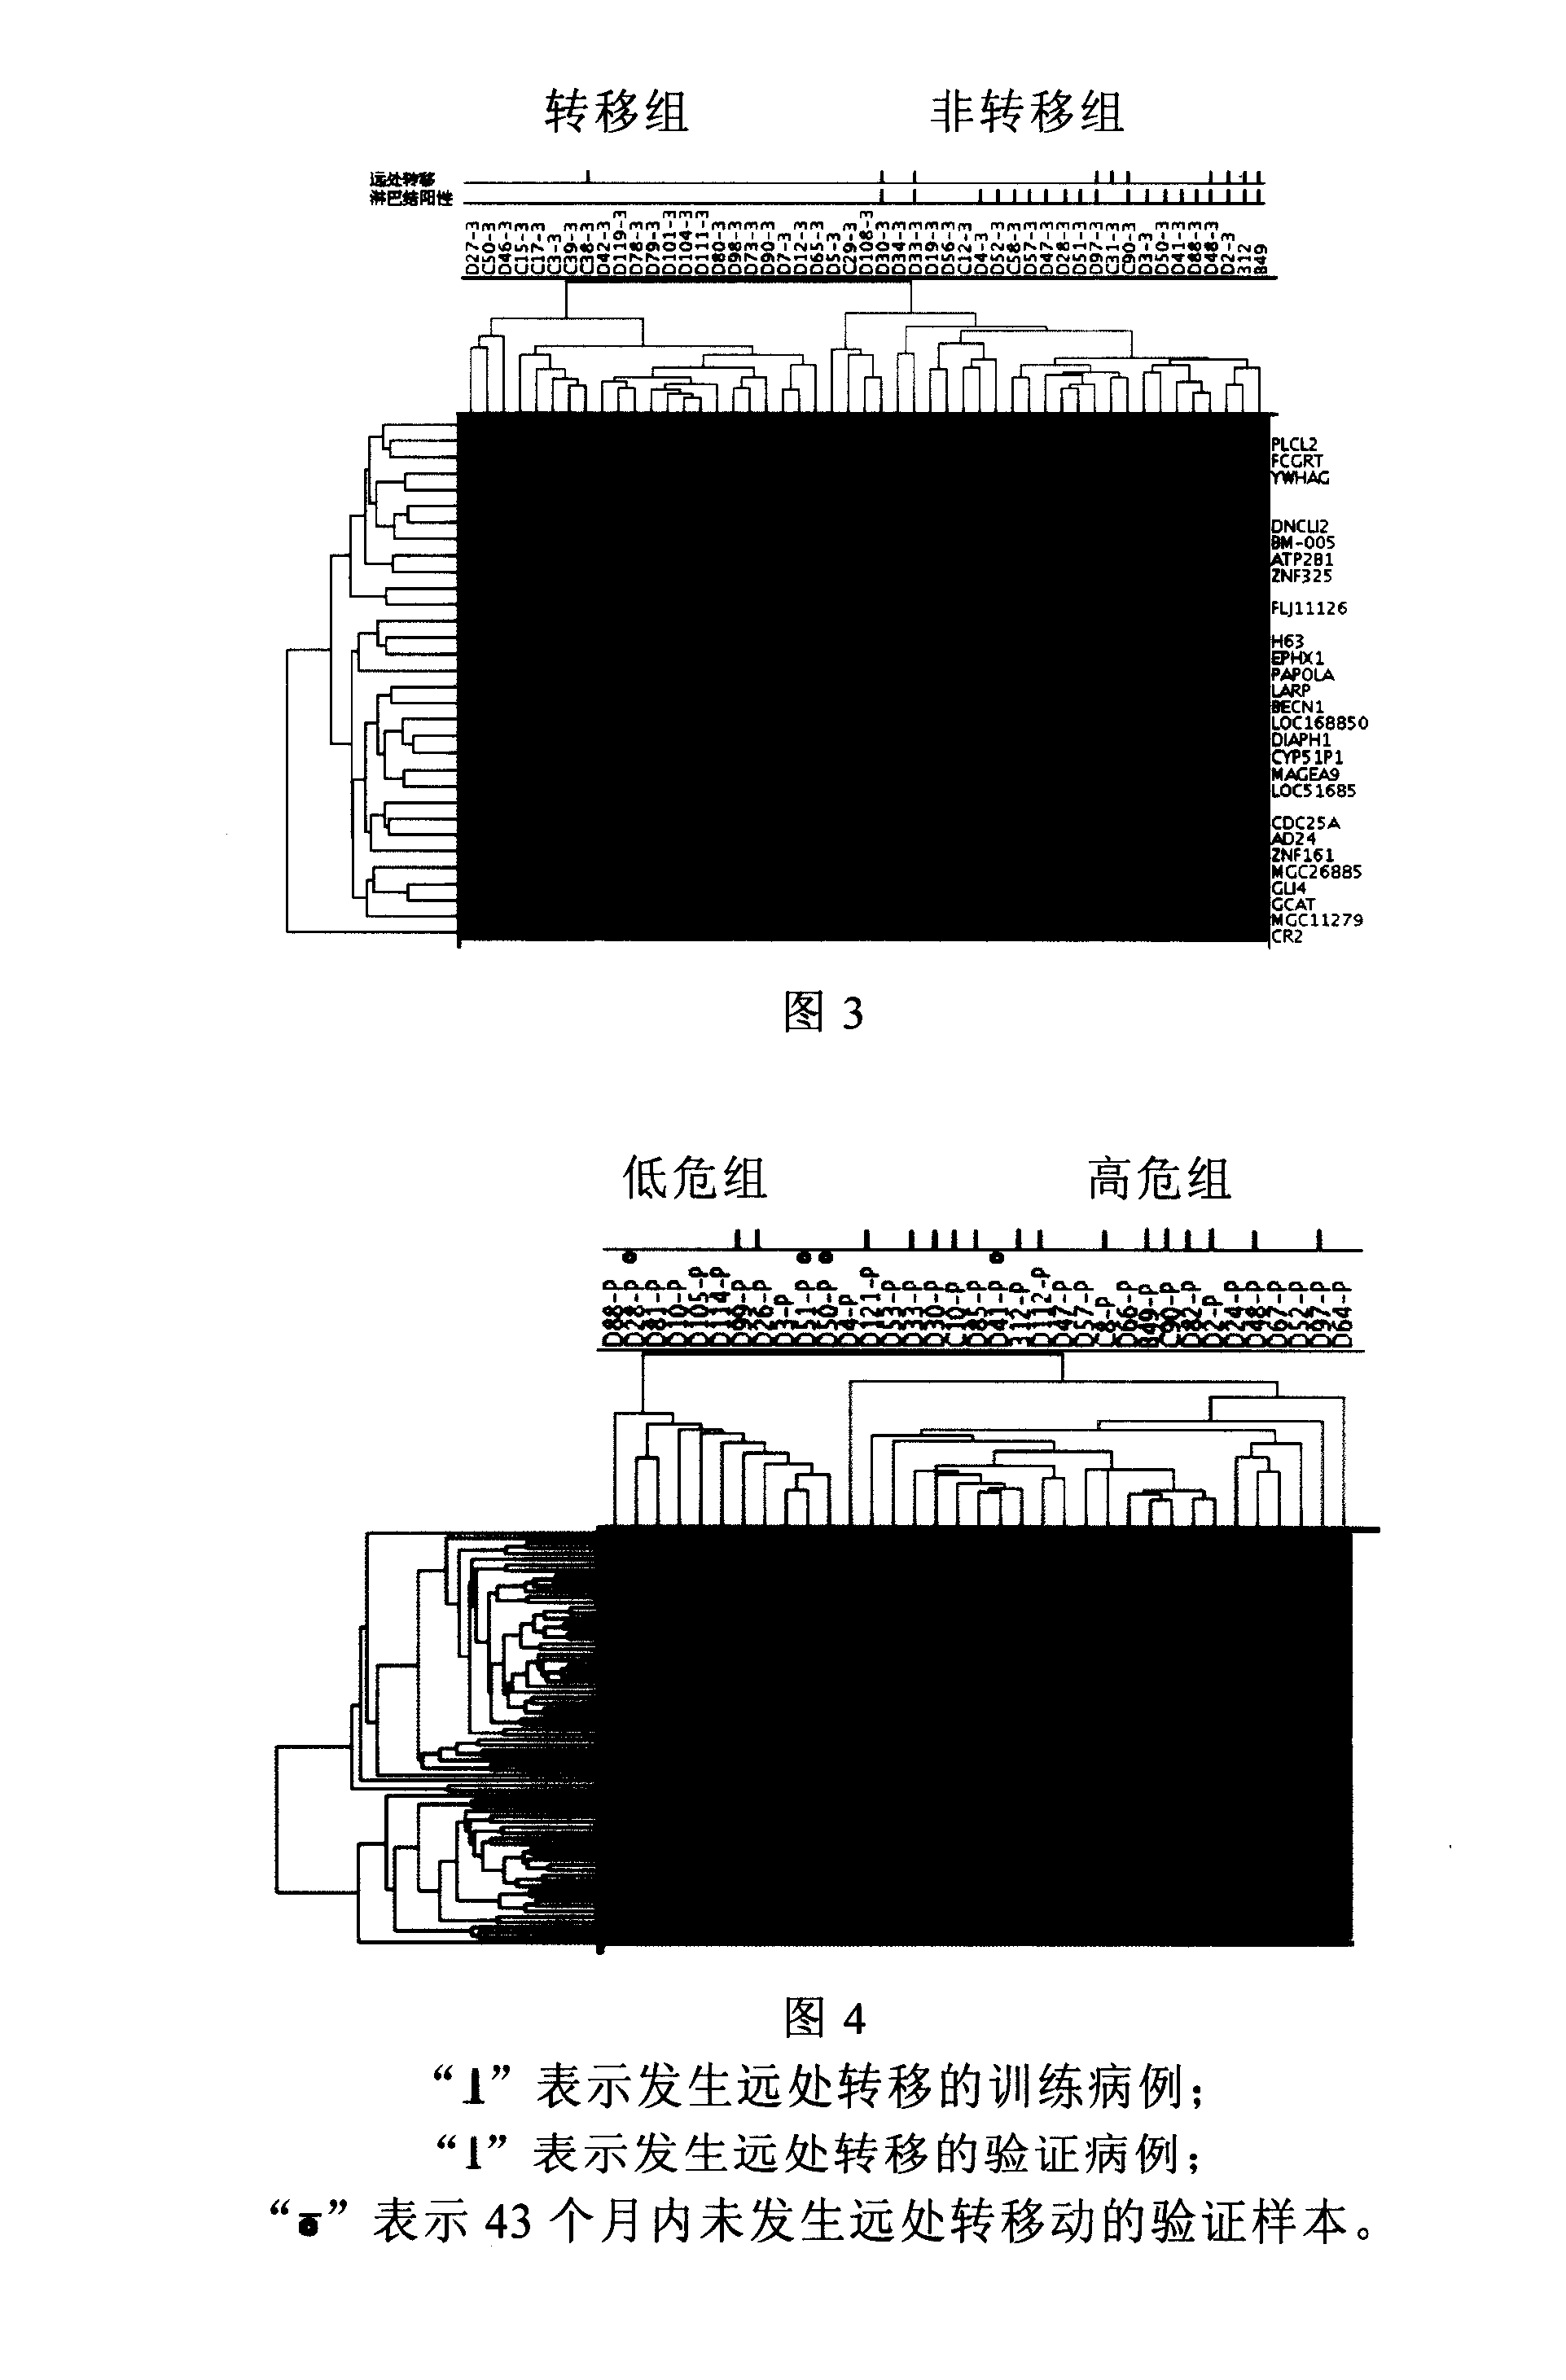 Mammary cancer diversion and prognosis molecule parting gene group, gene chip producing and using method